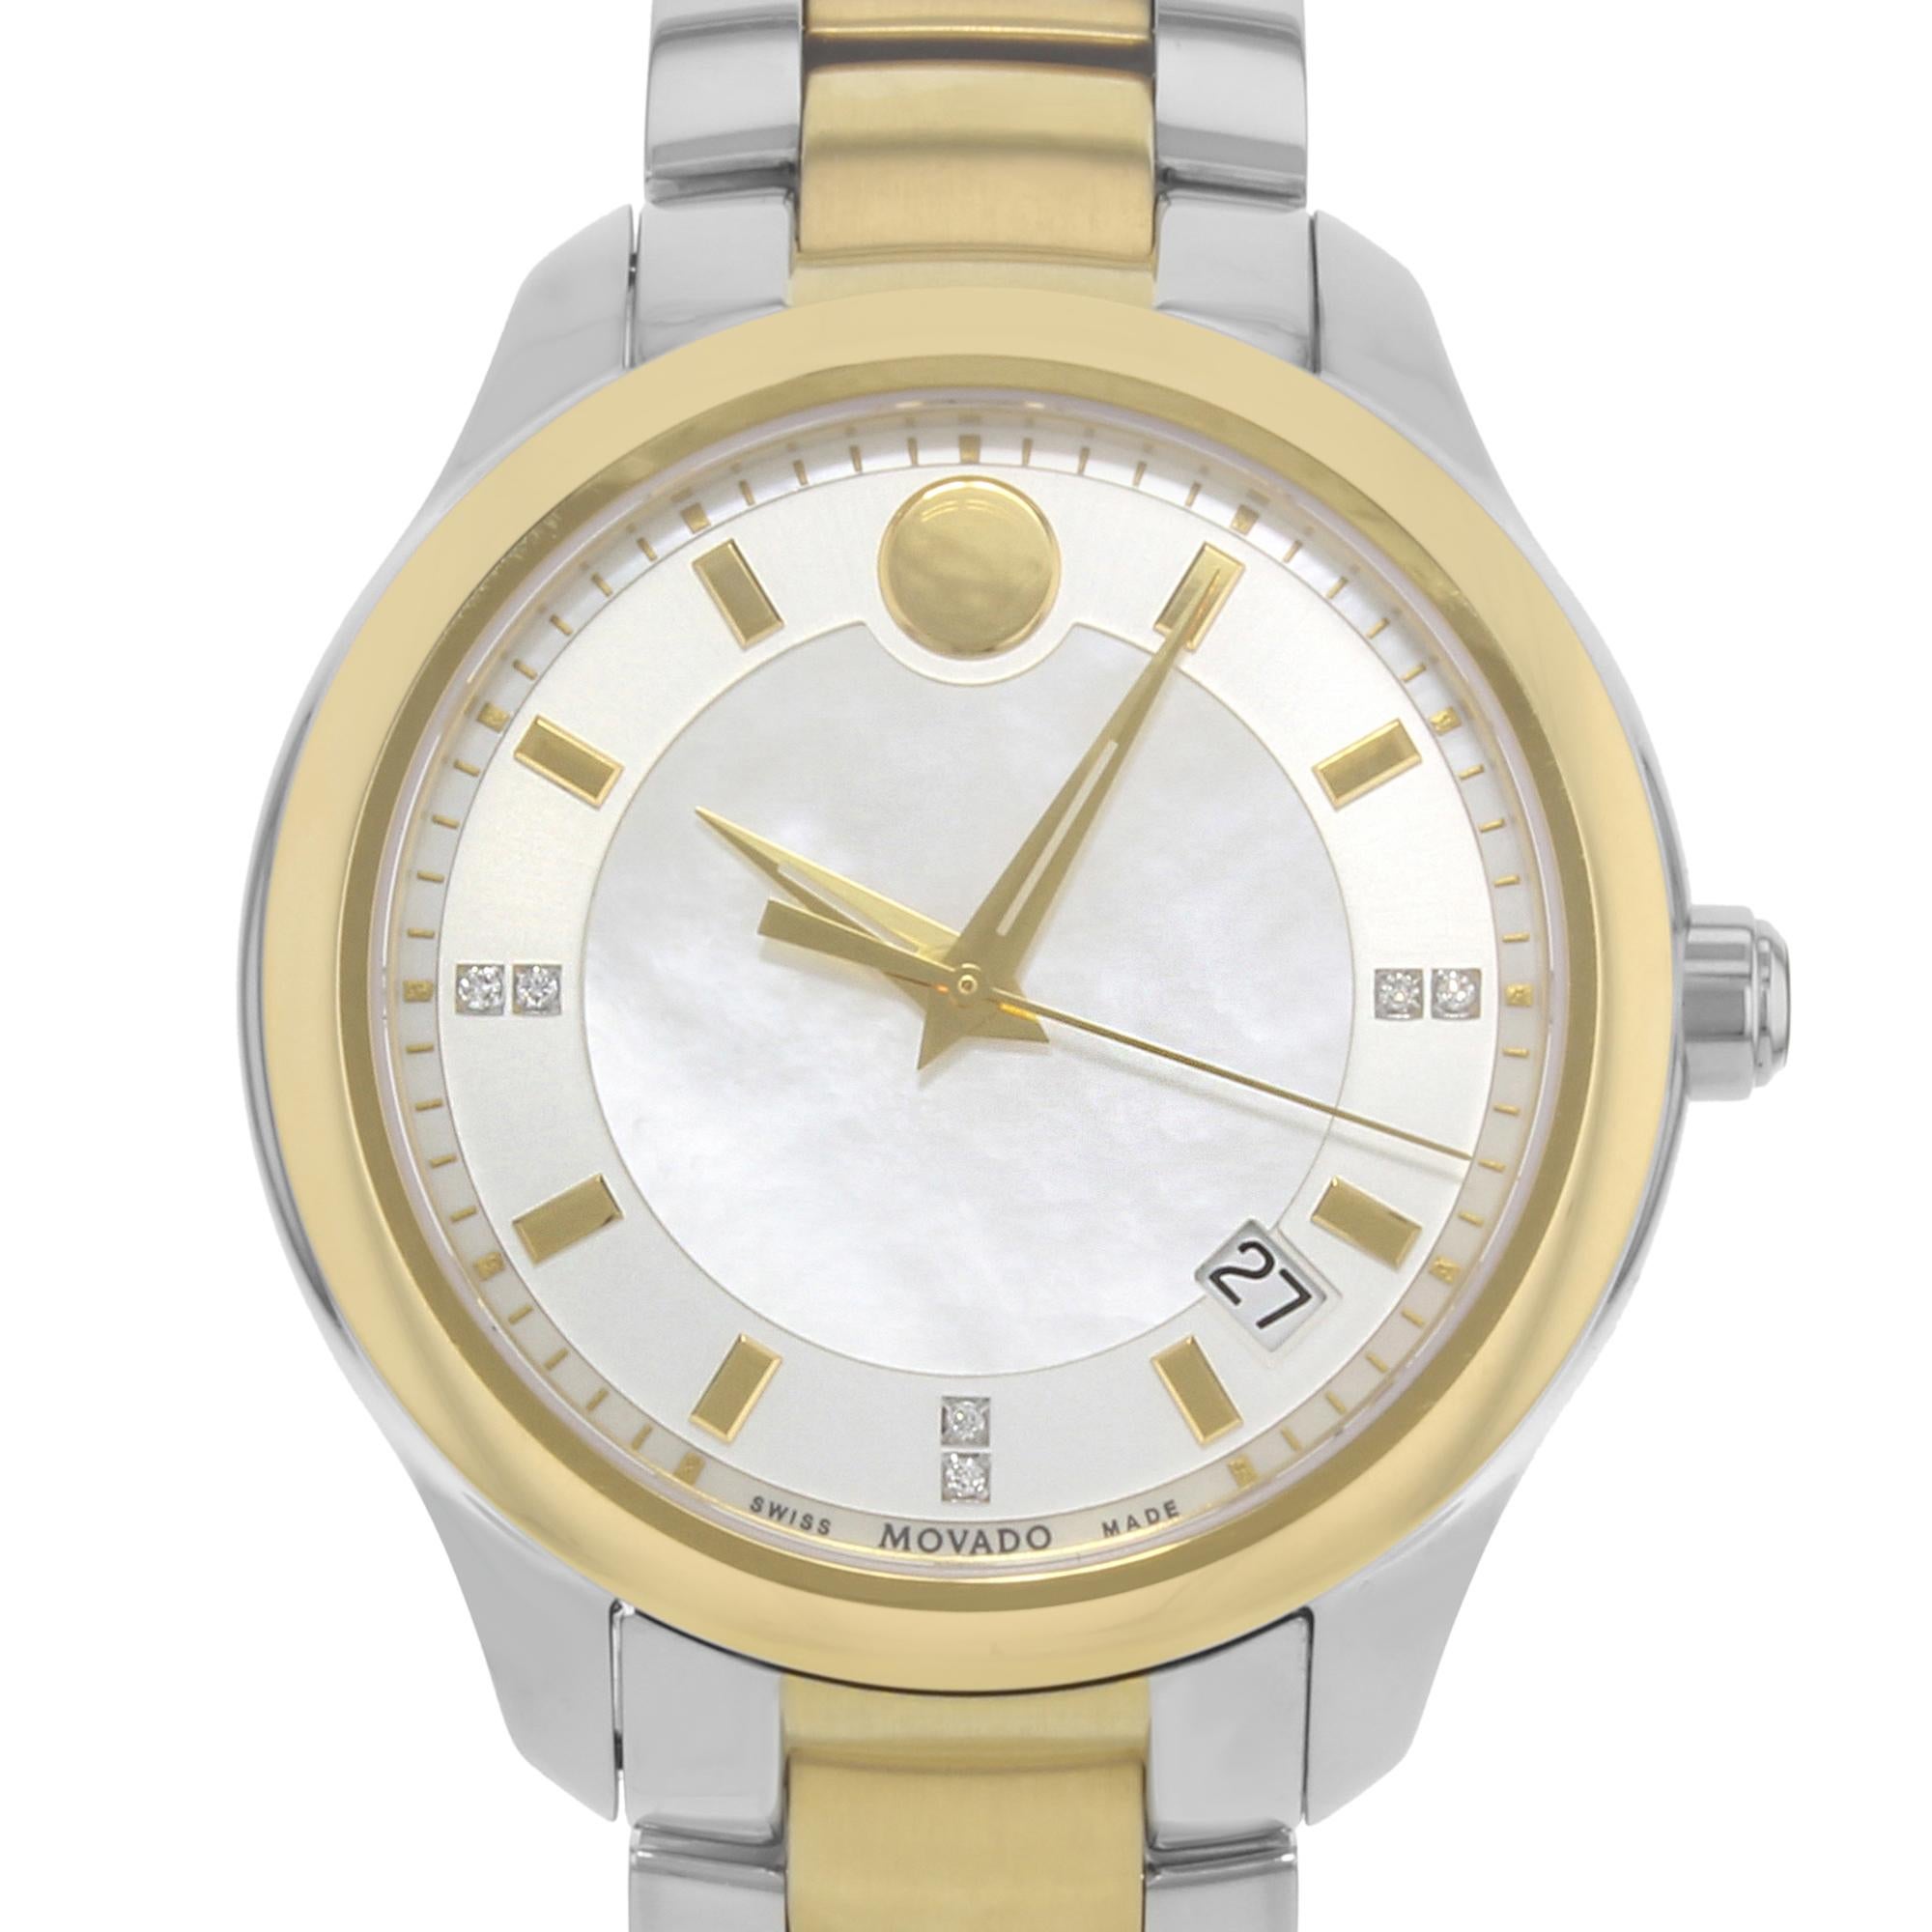 Mint preowned Movado Bellina Mother of Pearl Dial Two-Tone Ladies Watch 0606979. The watch was never worn or owned but has some insignificant blemishes on gold-tone steel surfaces due to storing and handling. This Beautiful Timepiece Features: